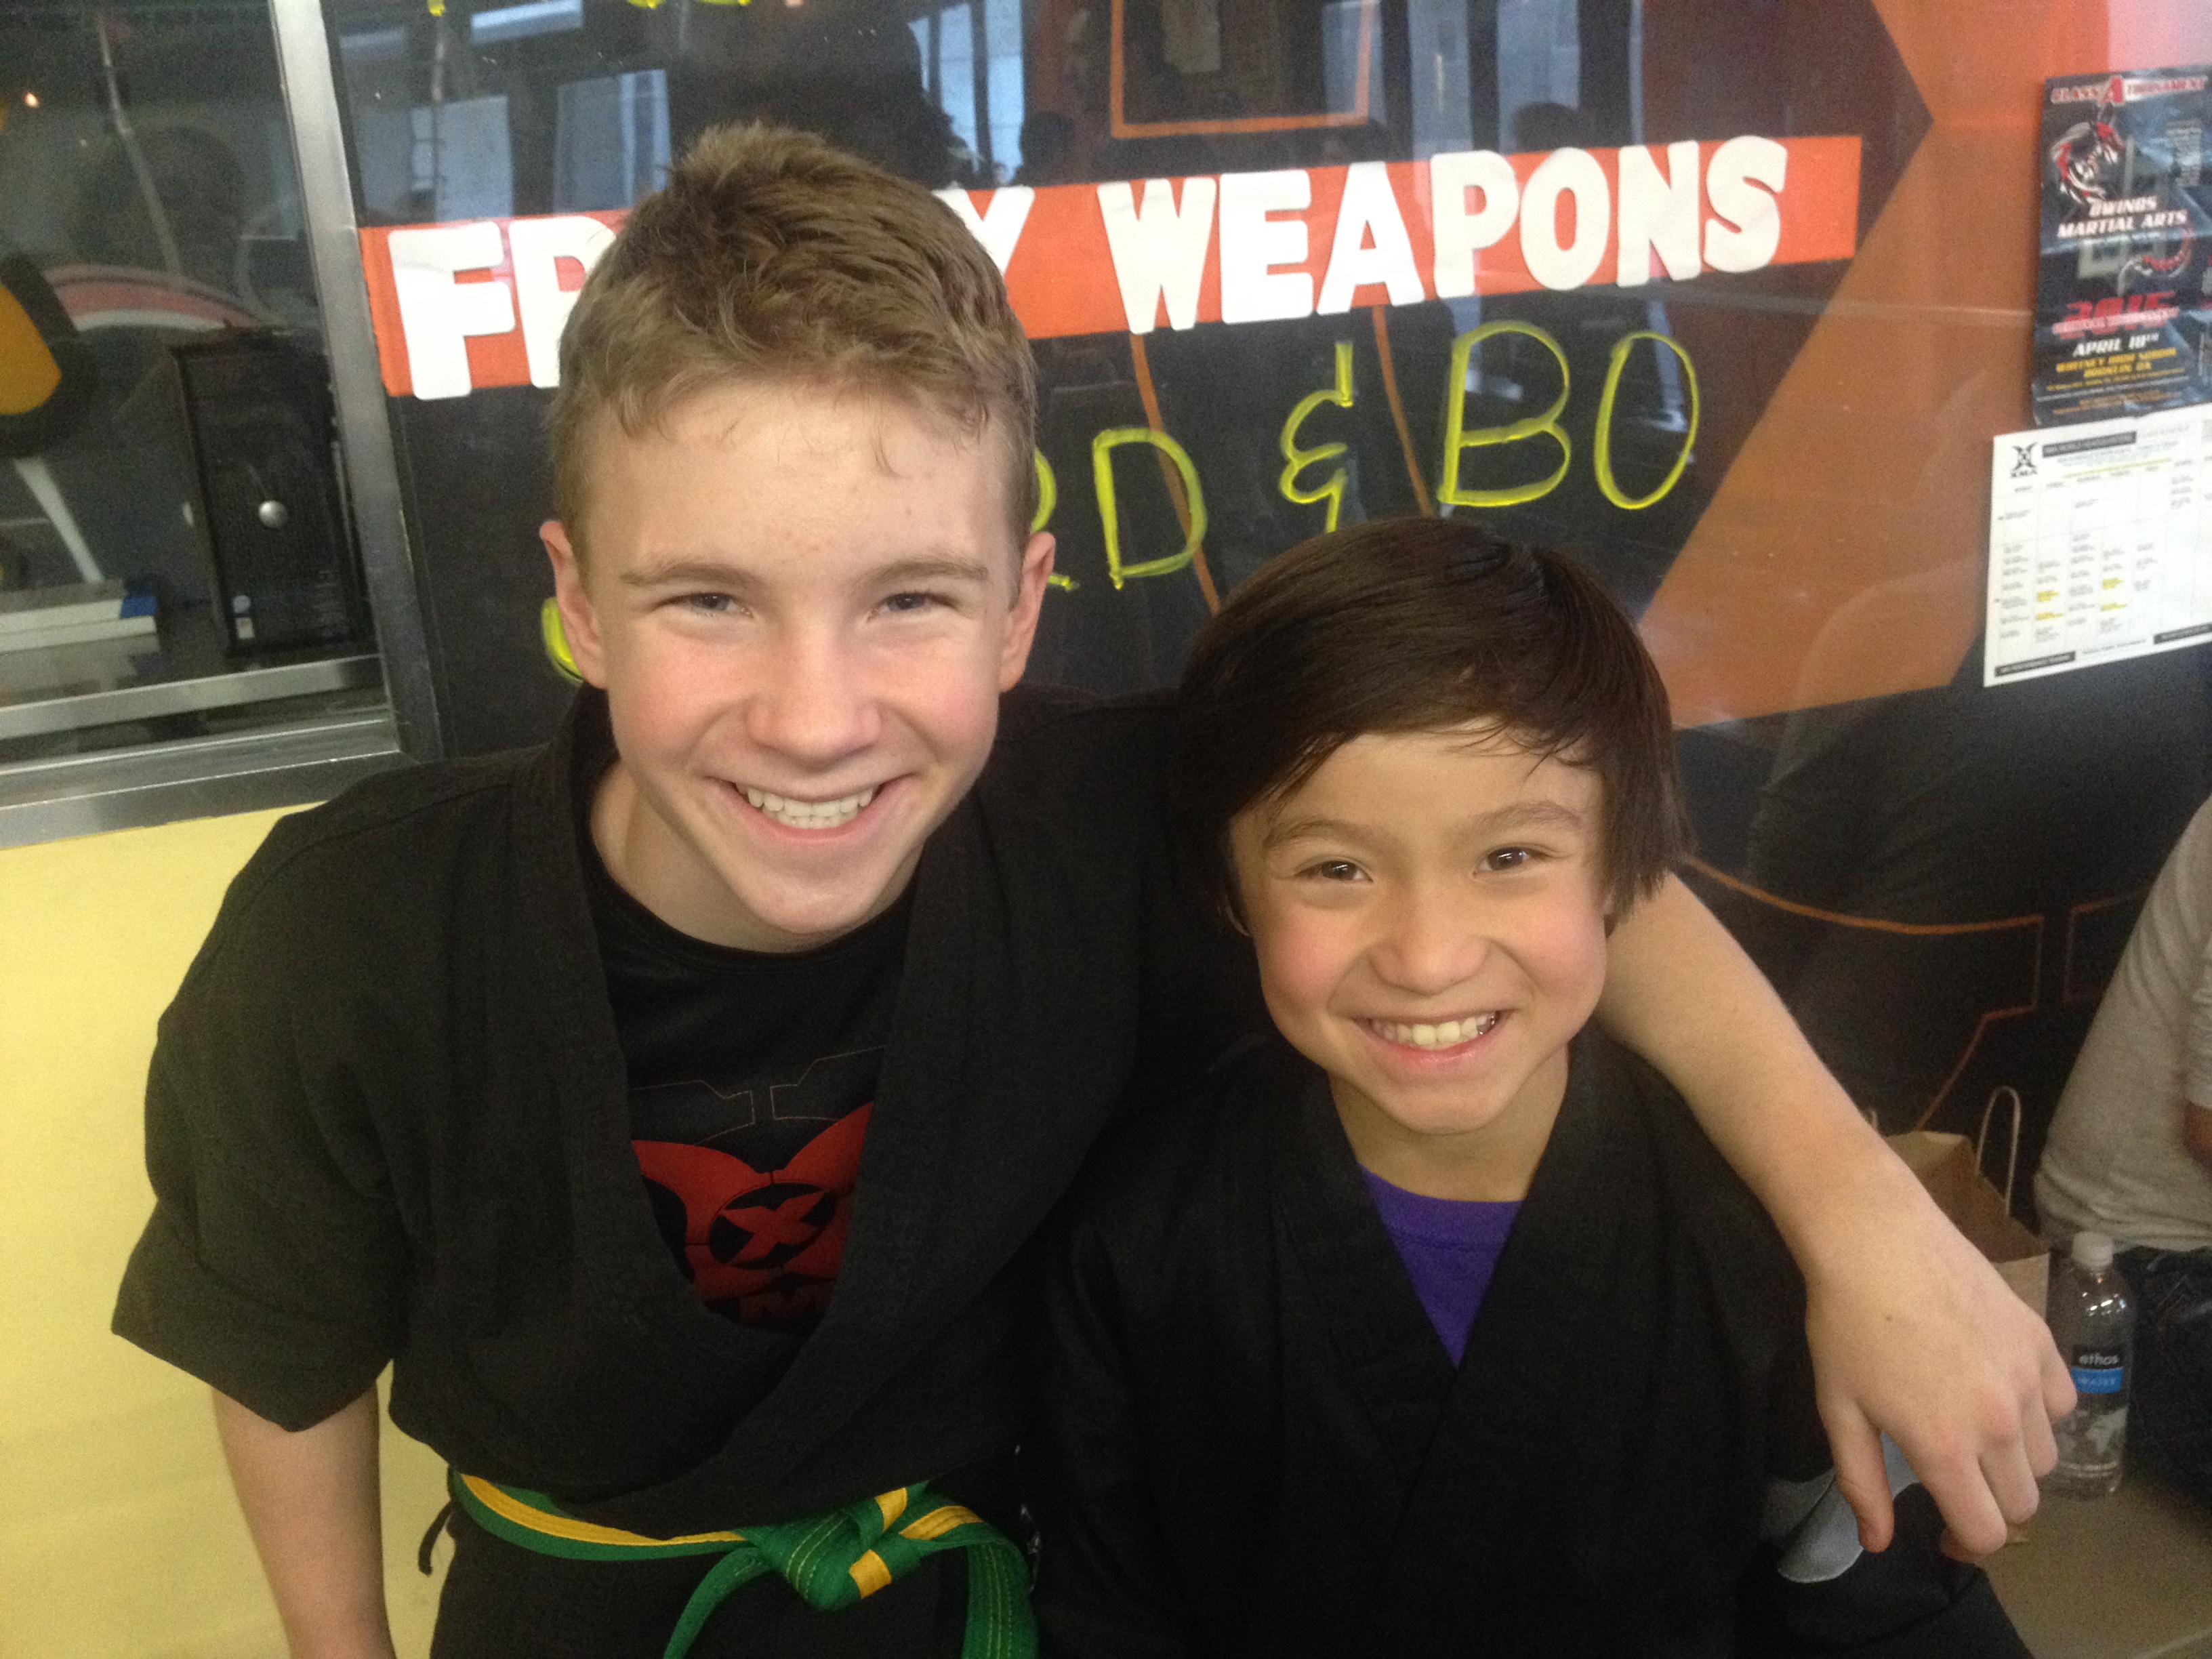 Justin Ellings and Forrest Wheeler - who plays Emery in ABC's Fresh Off the Boat.